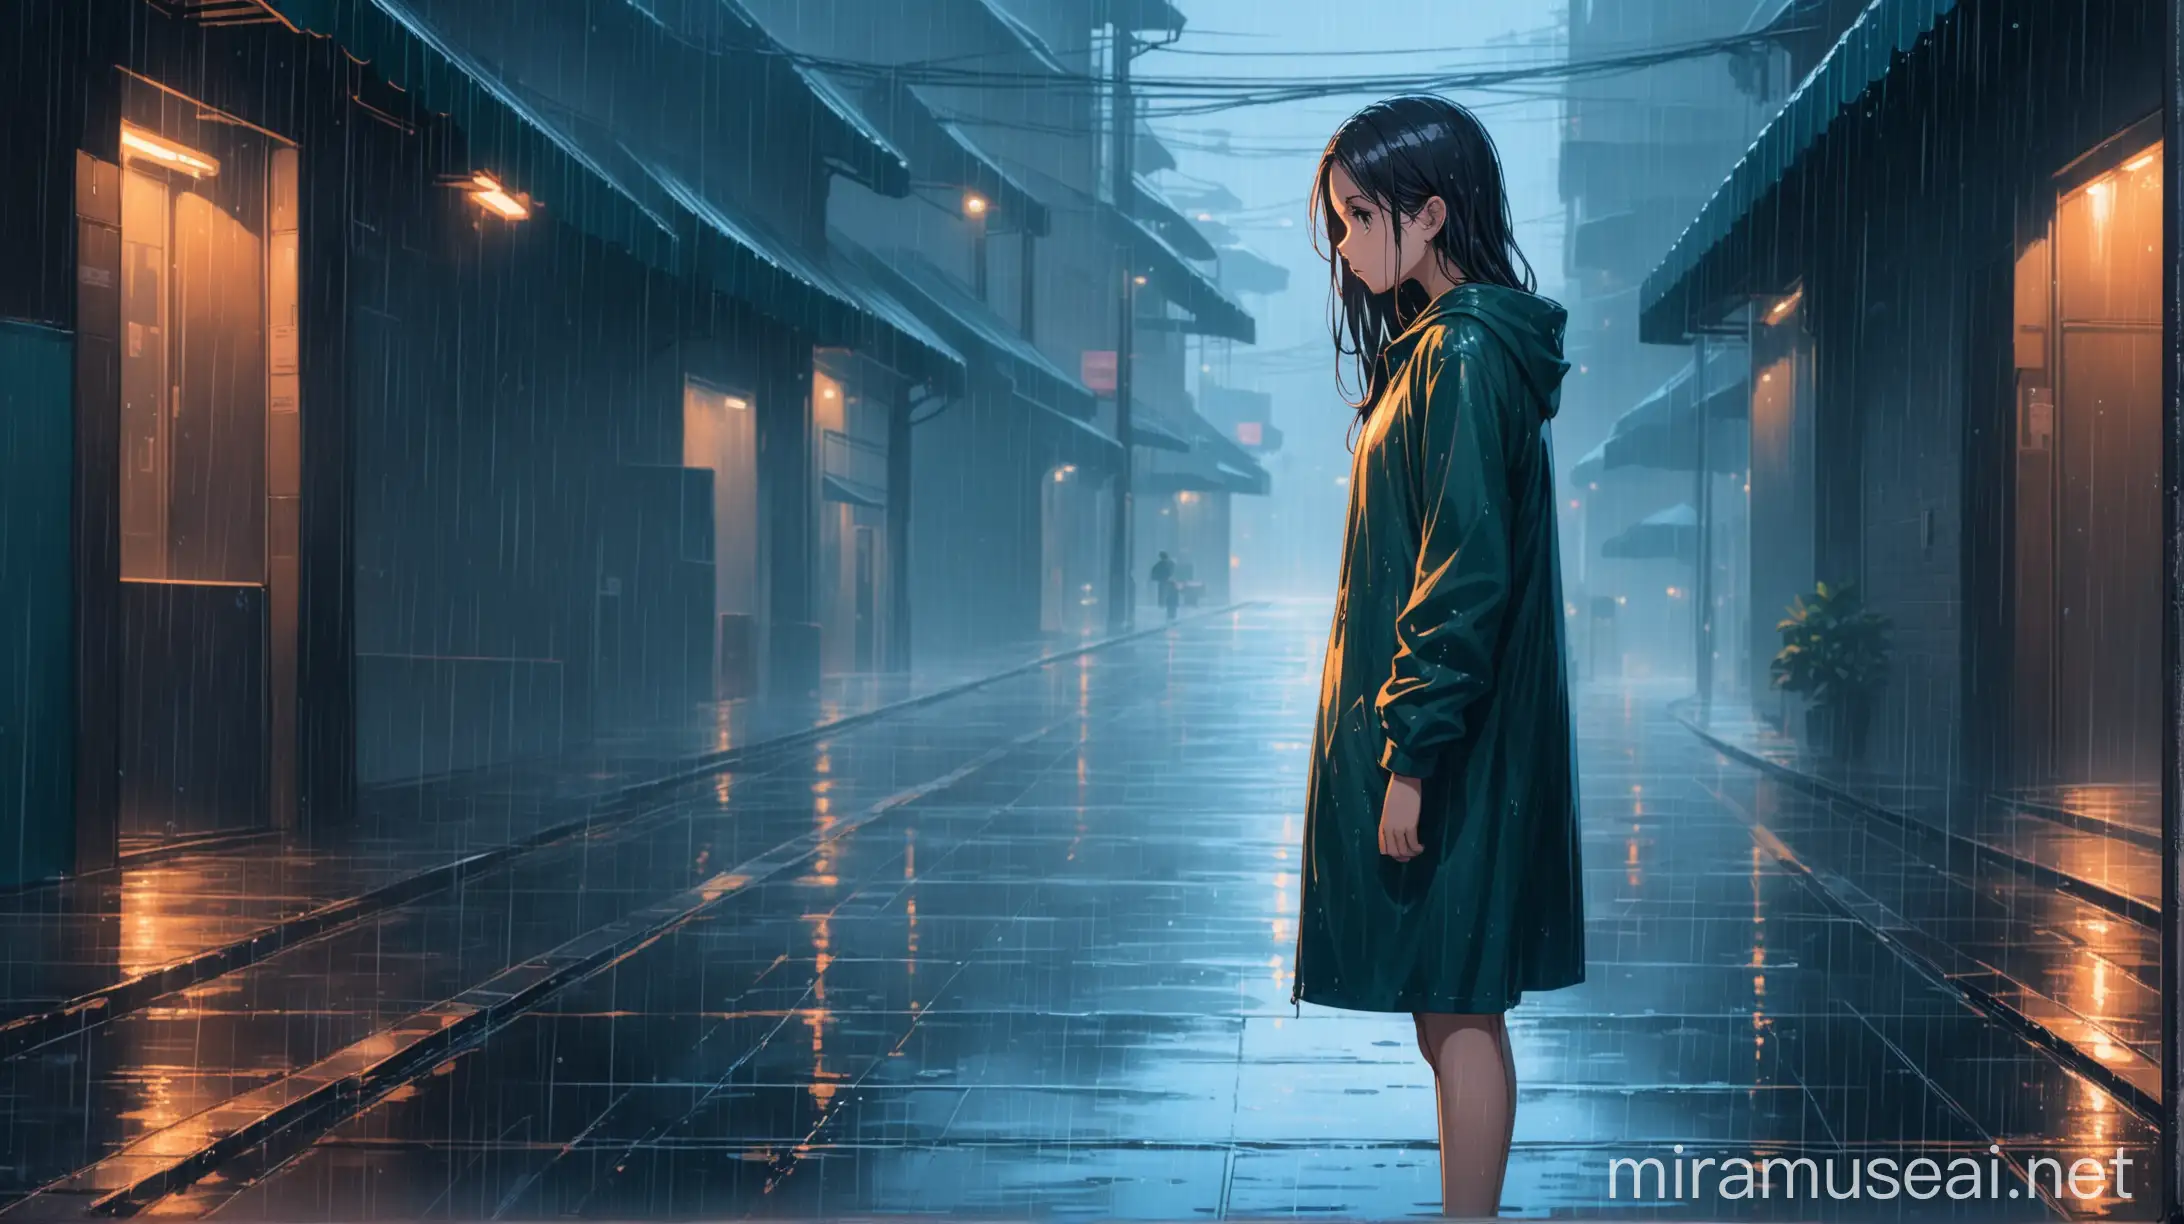 Young Girl Standing Pensively in Rainy Street